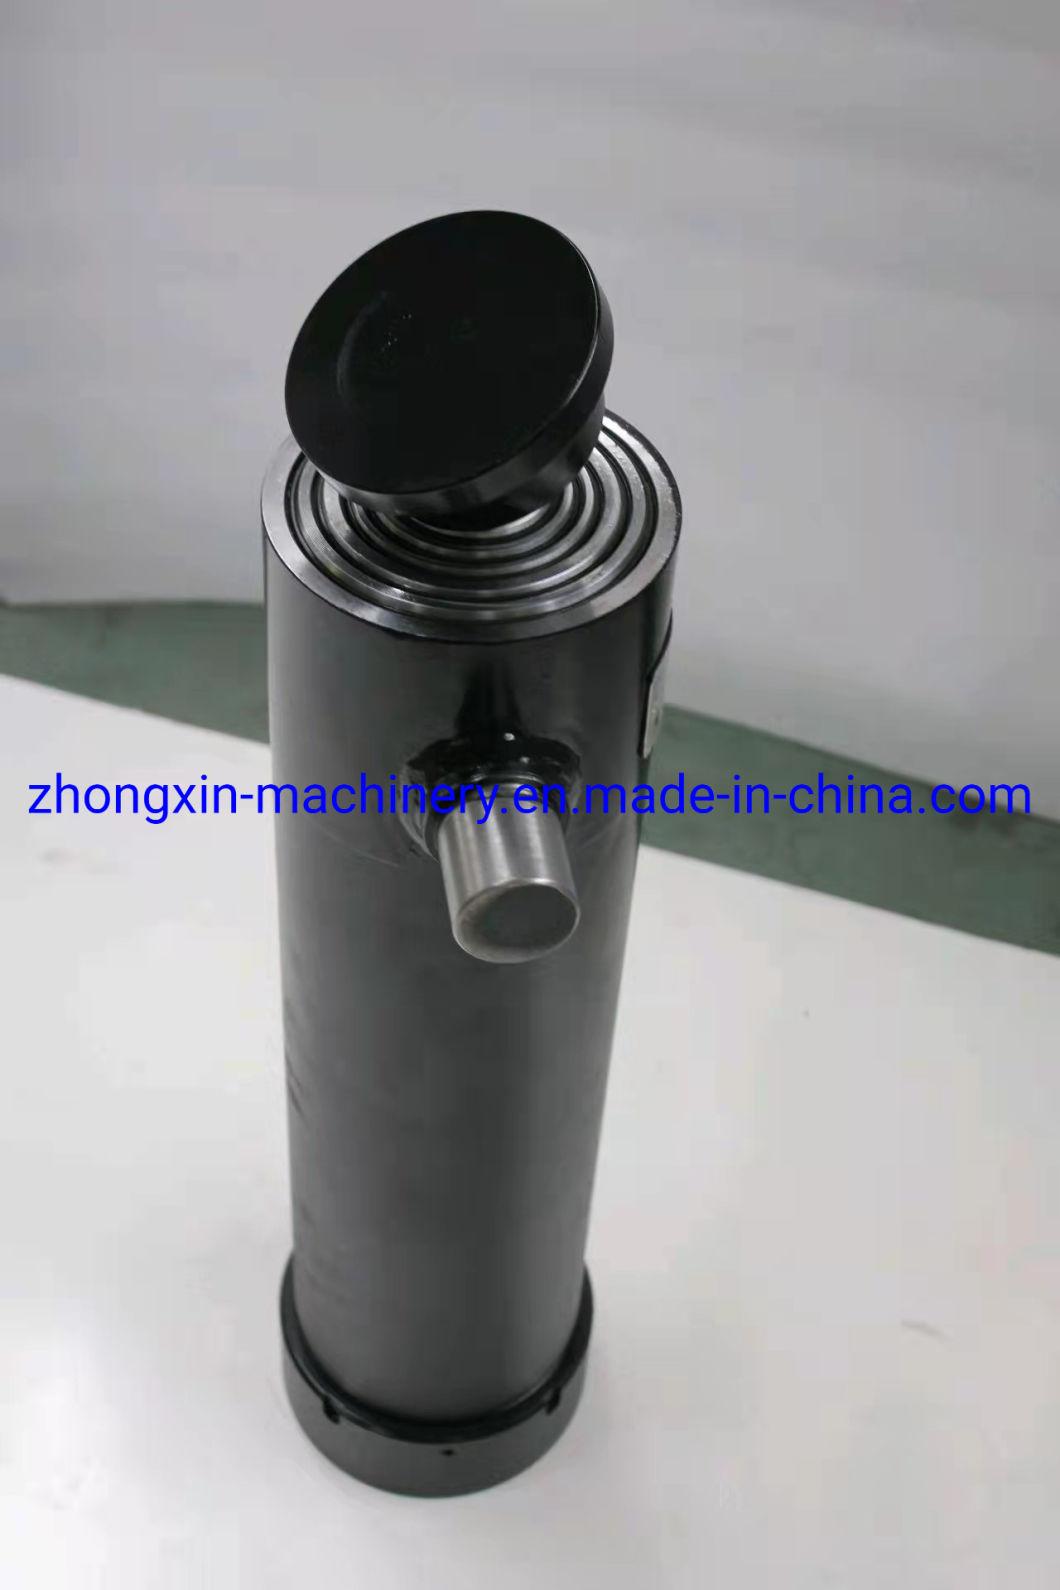 in China The Hydraulic Cylinders Manufacturer for Dumper Truck and Trailers